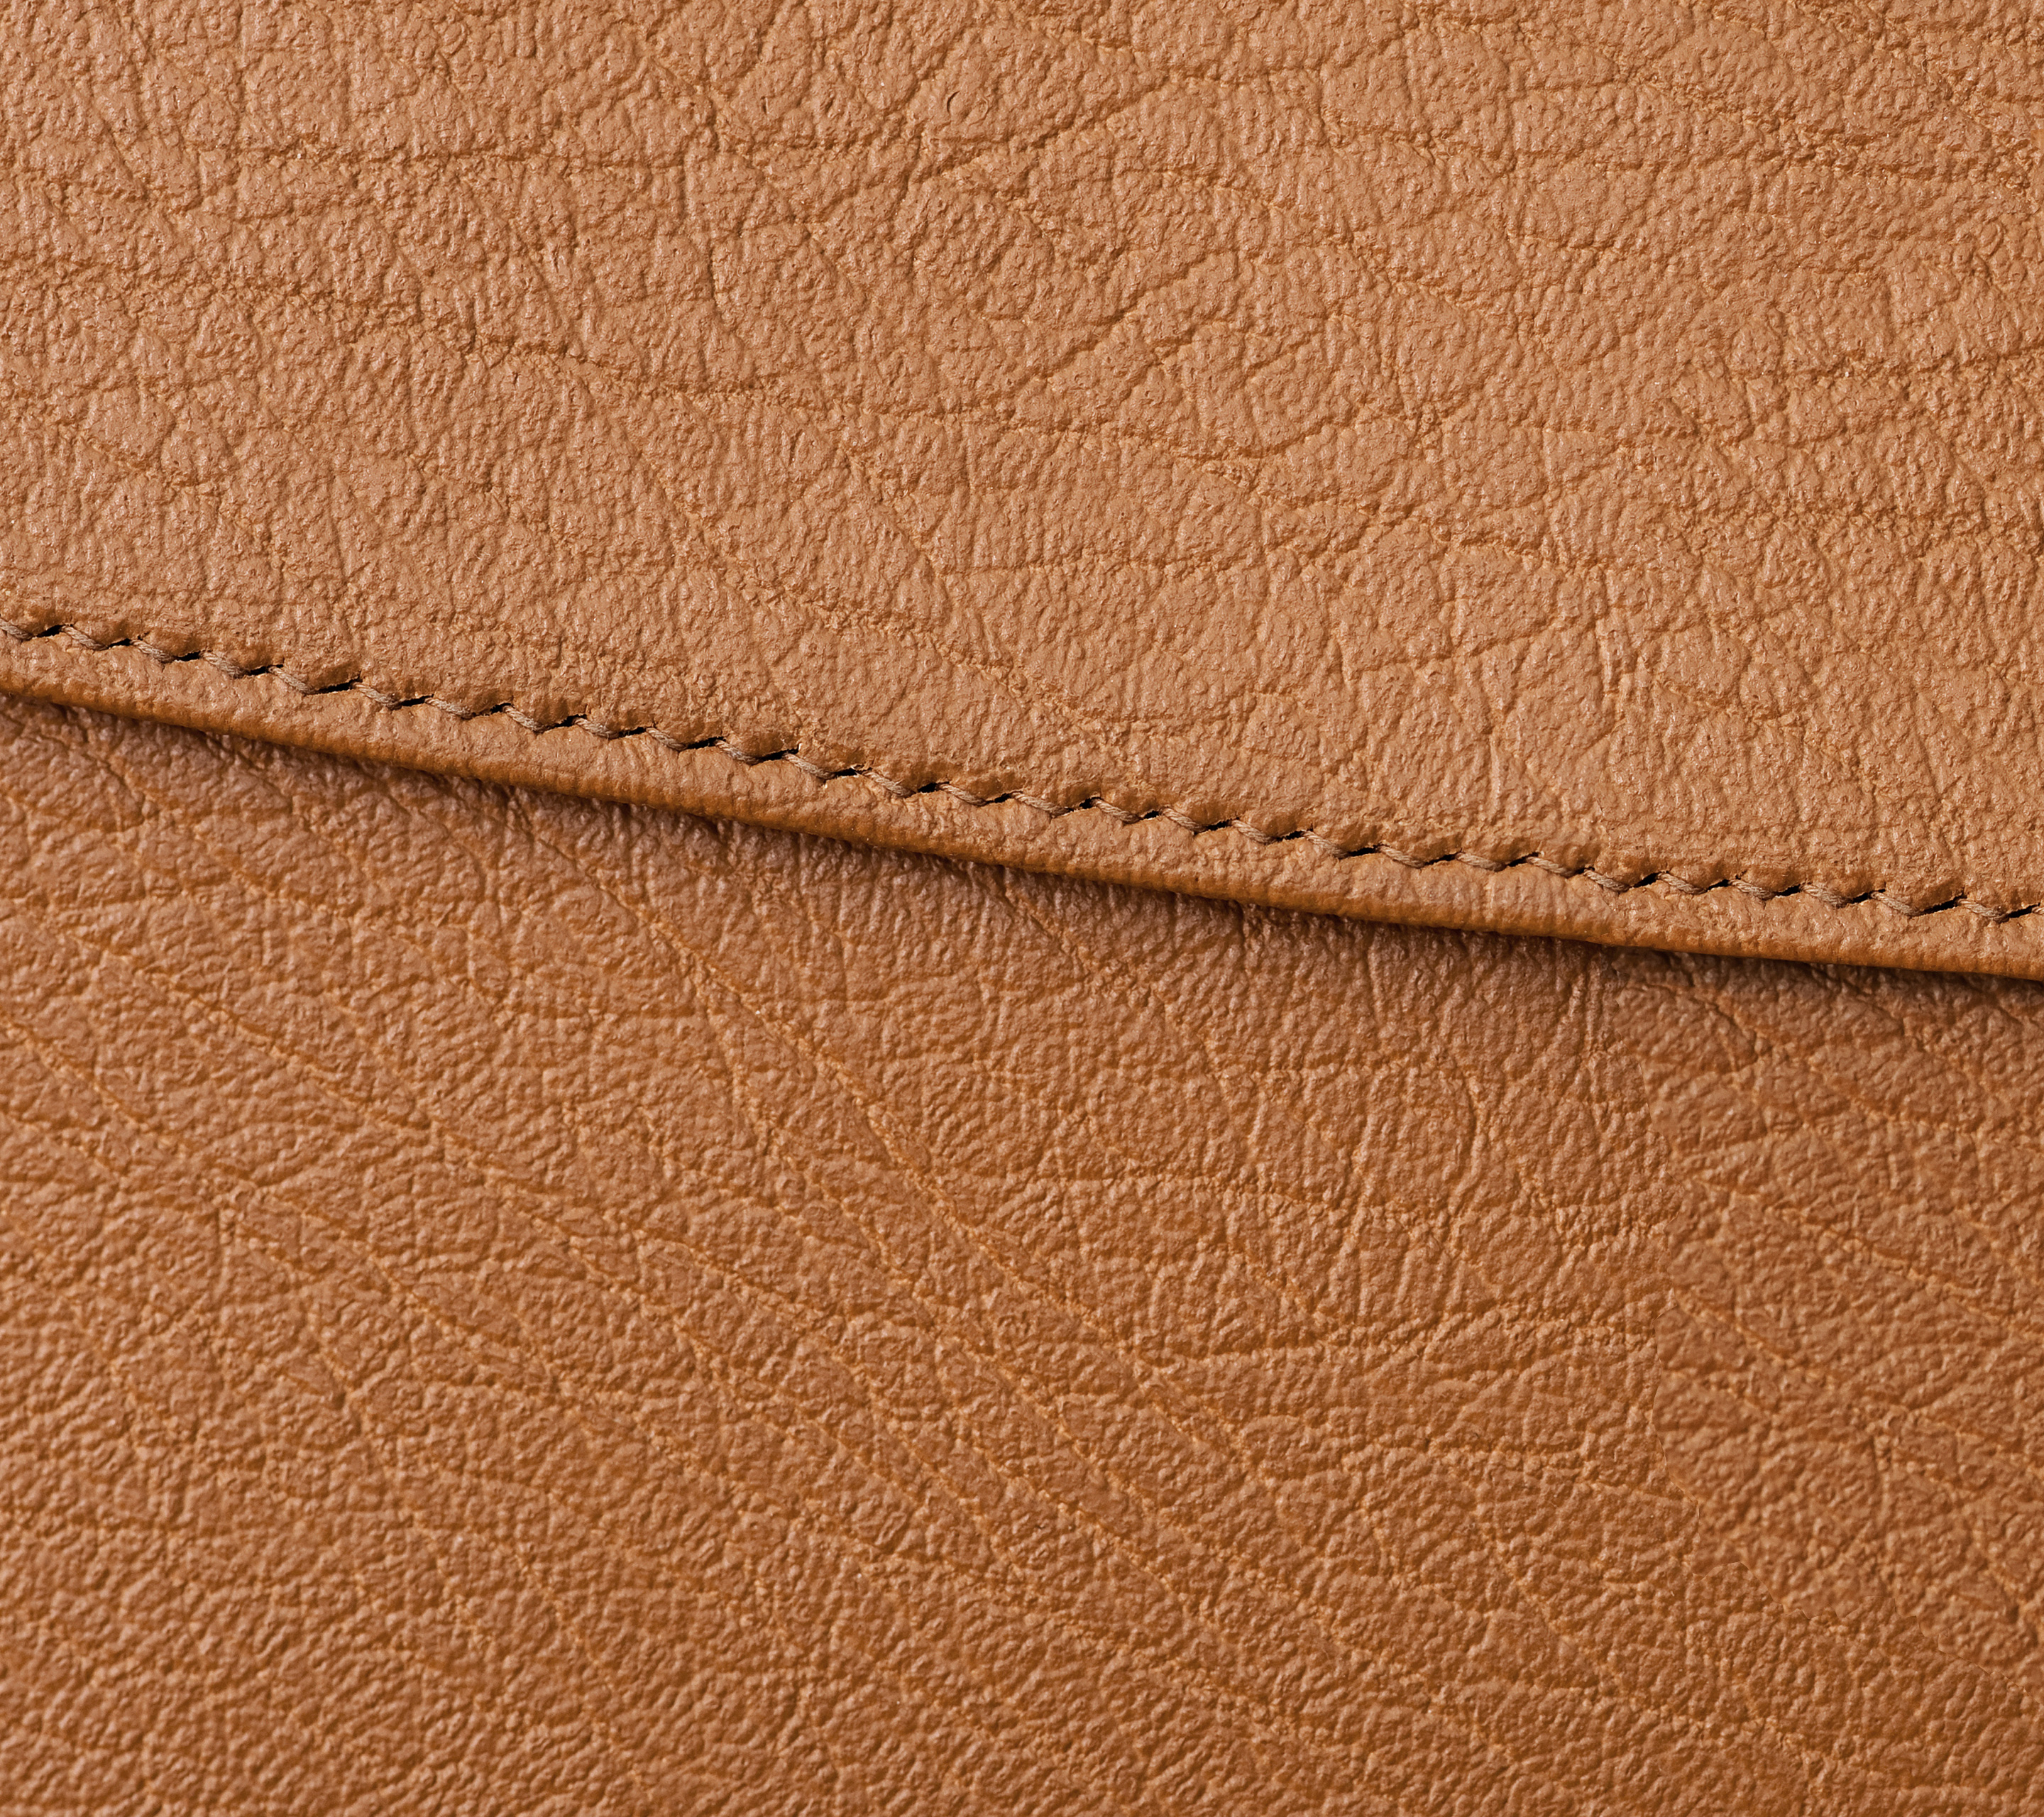 The Official Lg G4 Wallpaper Here Leather Background Included